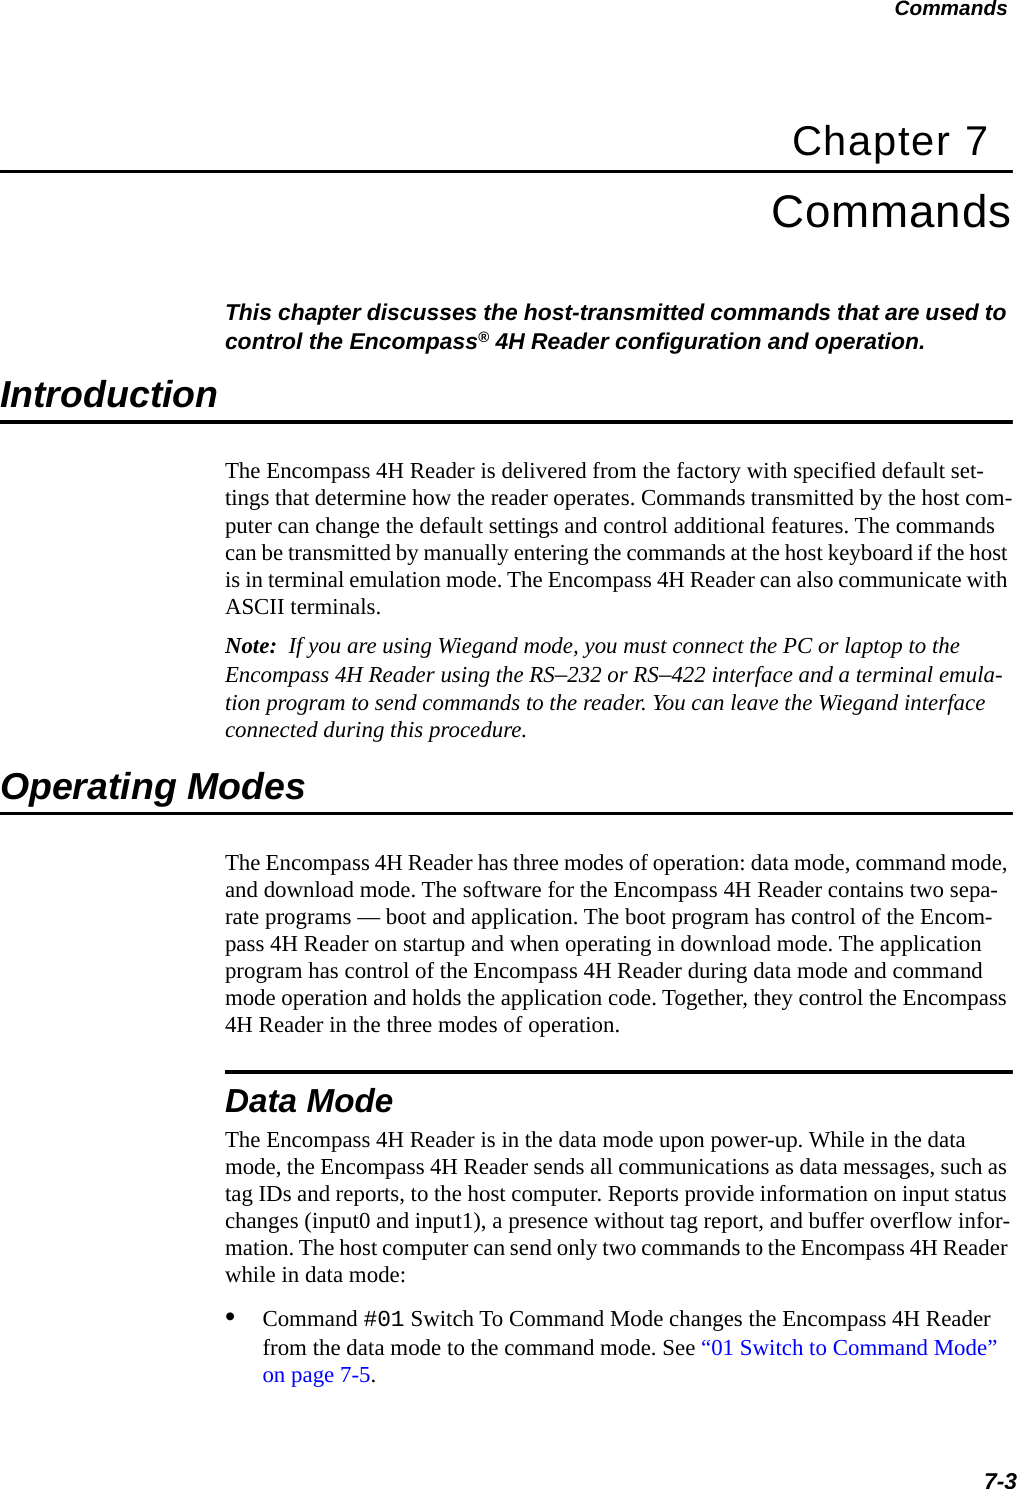 Commands7-3Chapter 7CommandsThis chapter discusses the host-transmitted commands that are used to control the Encompass® 4H Reader configuration and operation.IntroductionThe Encompass 4H Reader is delivered from the factory with specified default set-tings that determine how the reader operates. Commands transmitted by the host com-puter can change the default settings and control additional features. The commands can be transmitted by manually entering the commands at the host keyboard if the host is in terminal emulation mode. The Encompass 4H Reader can also communicate with ASCII terminals.Note:  If you are using Wiegand mode, you must connect the PC or laptop to the Encompass 4H Reader using the RS–232 or RS–422 interface and a terminal emula-tion program to send commands to the reader. You can leave the Wiegand interface connected during this procedure. Operating ModesThe Encompass 4H Reader has three modes of operation: data mode, command mode, and download mode. The software for the Encompass 4H Reader contains two sepa-rate programs — boot and application. The boot program has control of the Encom-pass 4H Reader on startup and when operating in download mode. The application program has control of the Encompass 4H Reader during data mode and command mode operation and holds the application code. Together, they control the Encompass 4H Reader in the three modes of operation.Data ModeThe Encompass 4H Reader is in the data mode upon power-up. While in the data mode, the Encompass 4H Reader sends all communications as data messages, such as tag IDs and reports, to the host computer. Reports provide information on input status changes (input0 and input1), a presence without tag report, and buffer overflow infor-mation. The host computer can send only two commands to the Encompass 4H Reader while in data mode: •Command #01 Switch To Command Mode changes the Encompass 4H Reader from the data mode to the command mode. See “01 Switch to Command Mode” on page 7-5.